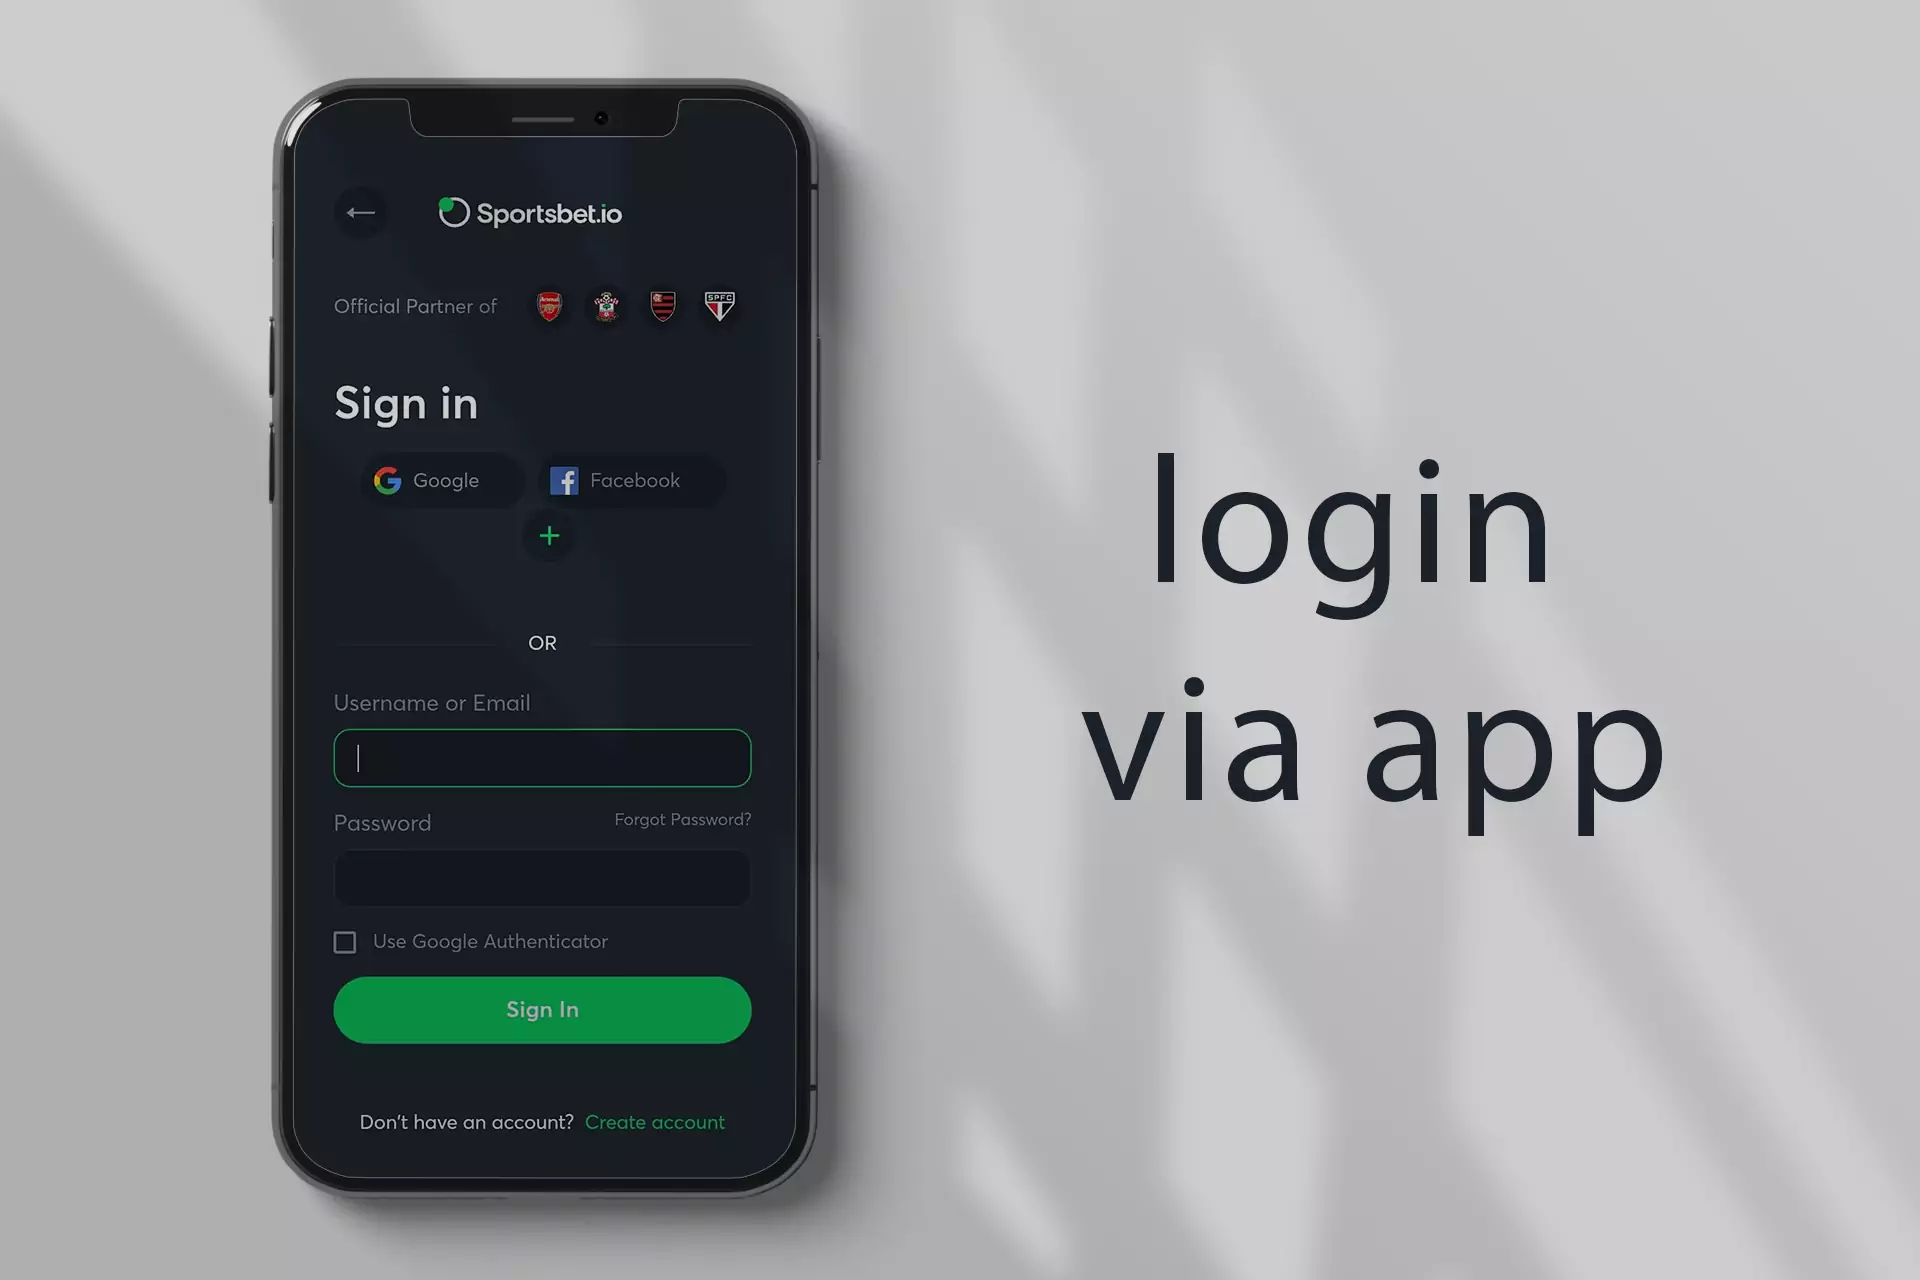 Sign in to the app if you already have an account.